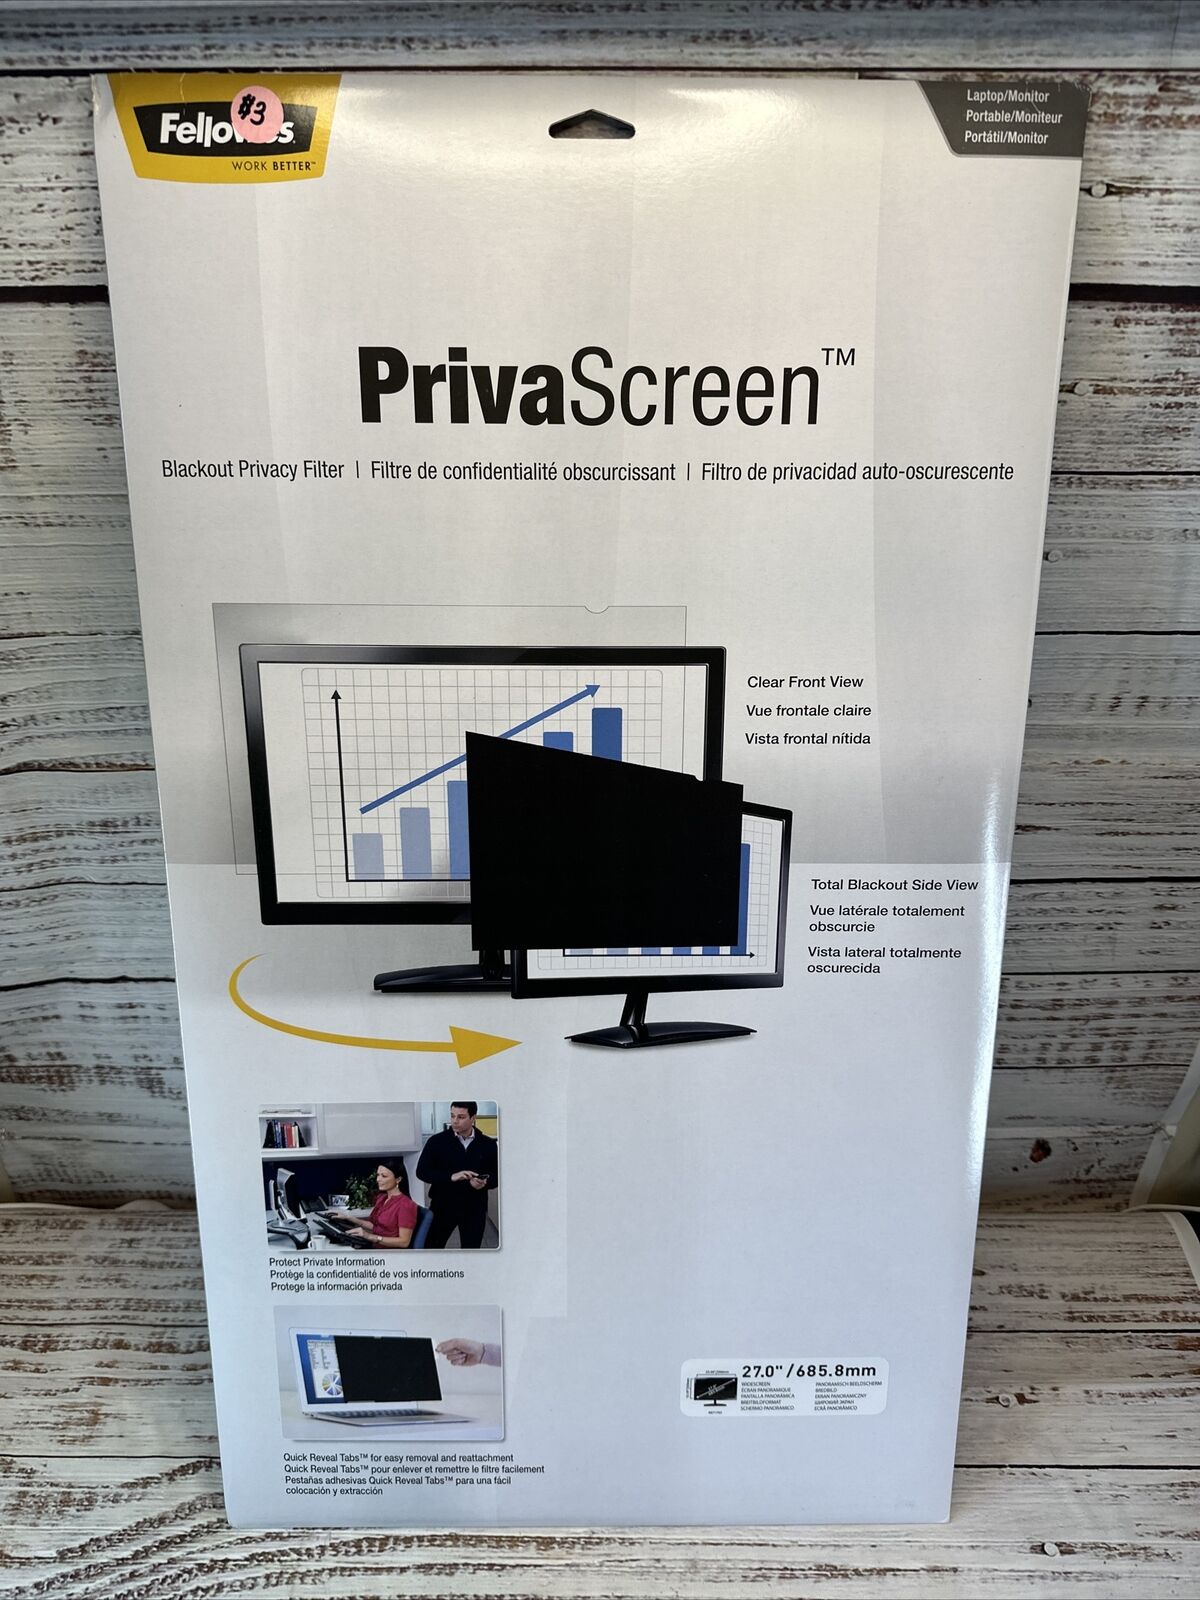 NEW SEALED Fellowes PrivaScreen™ Blackout Privacy Filter - 27.0